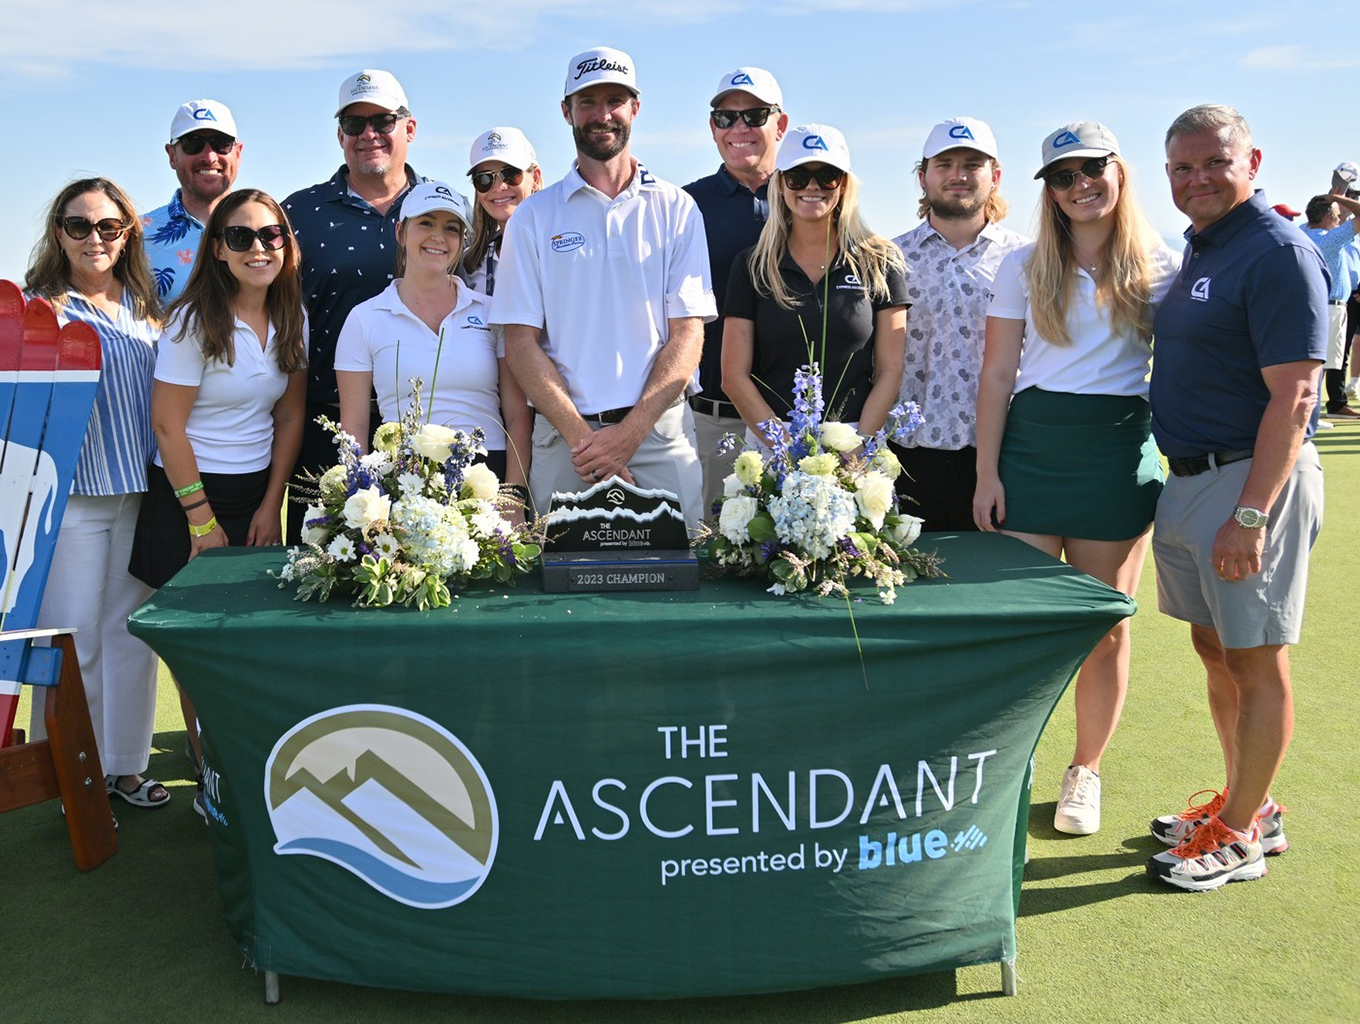 The Ascendant presented by Blue: An Outstanding Tournament